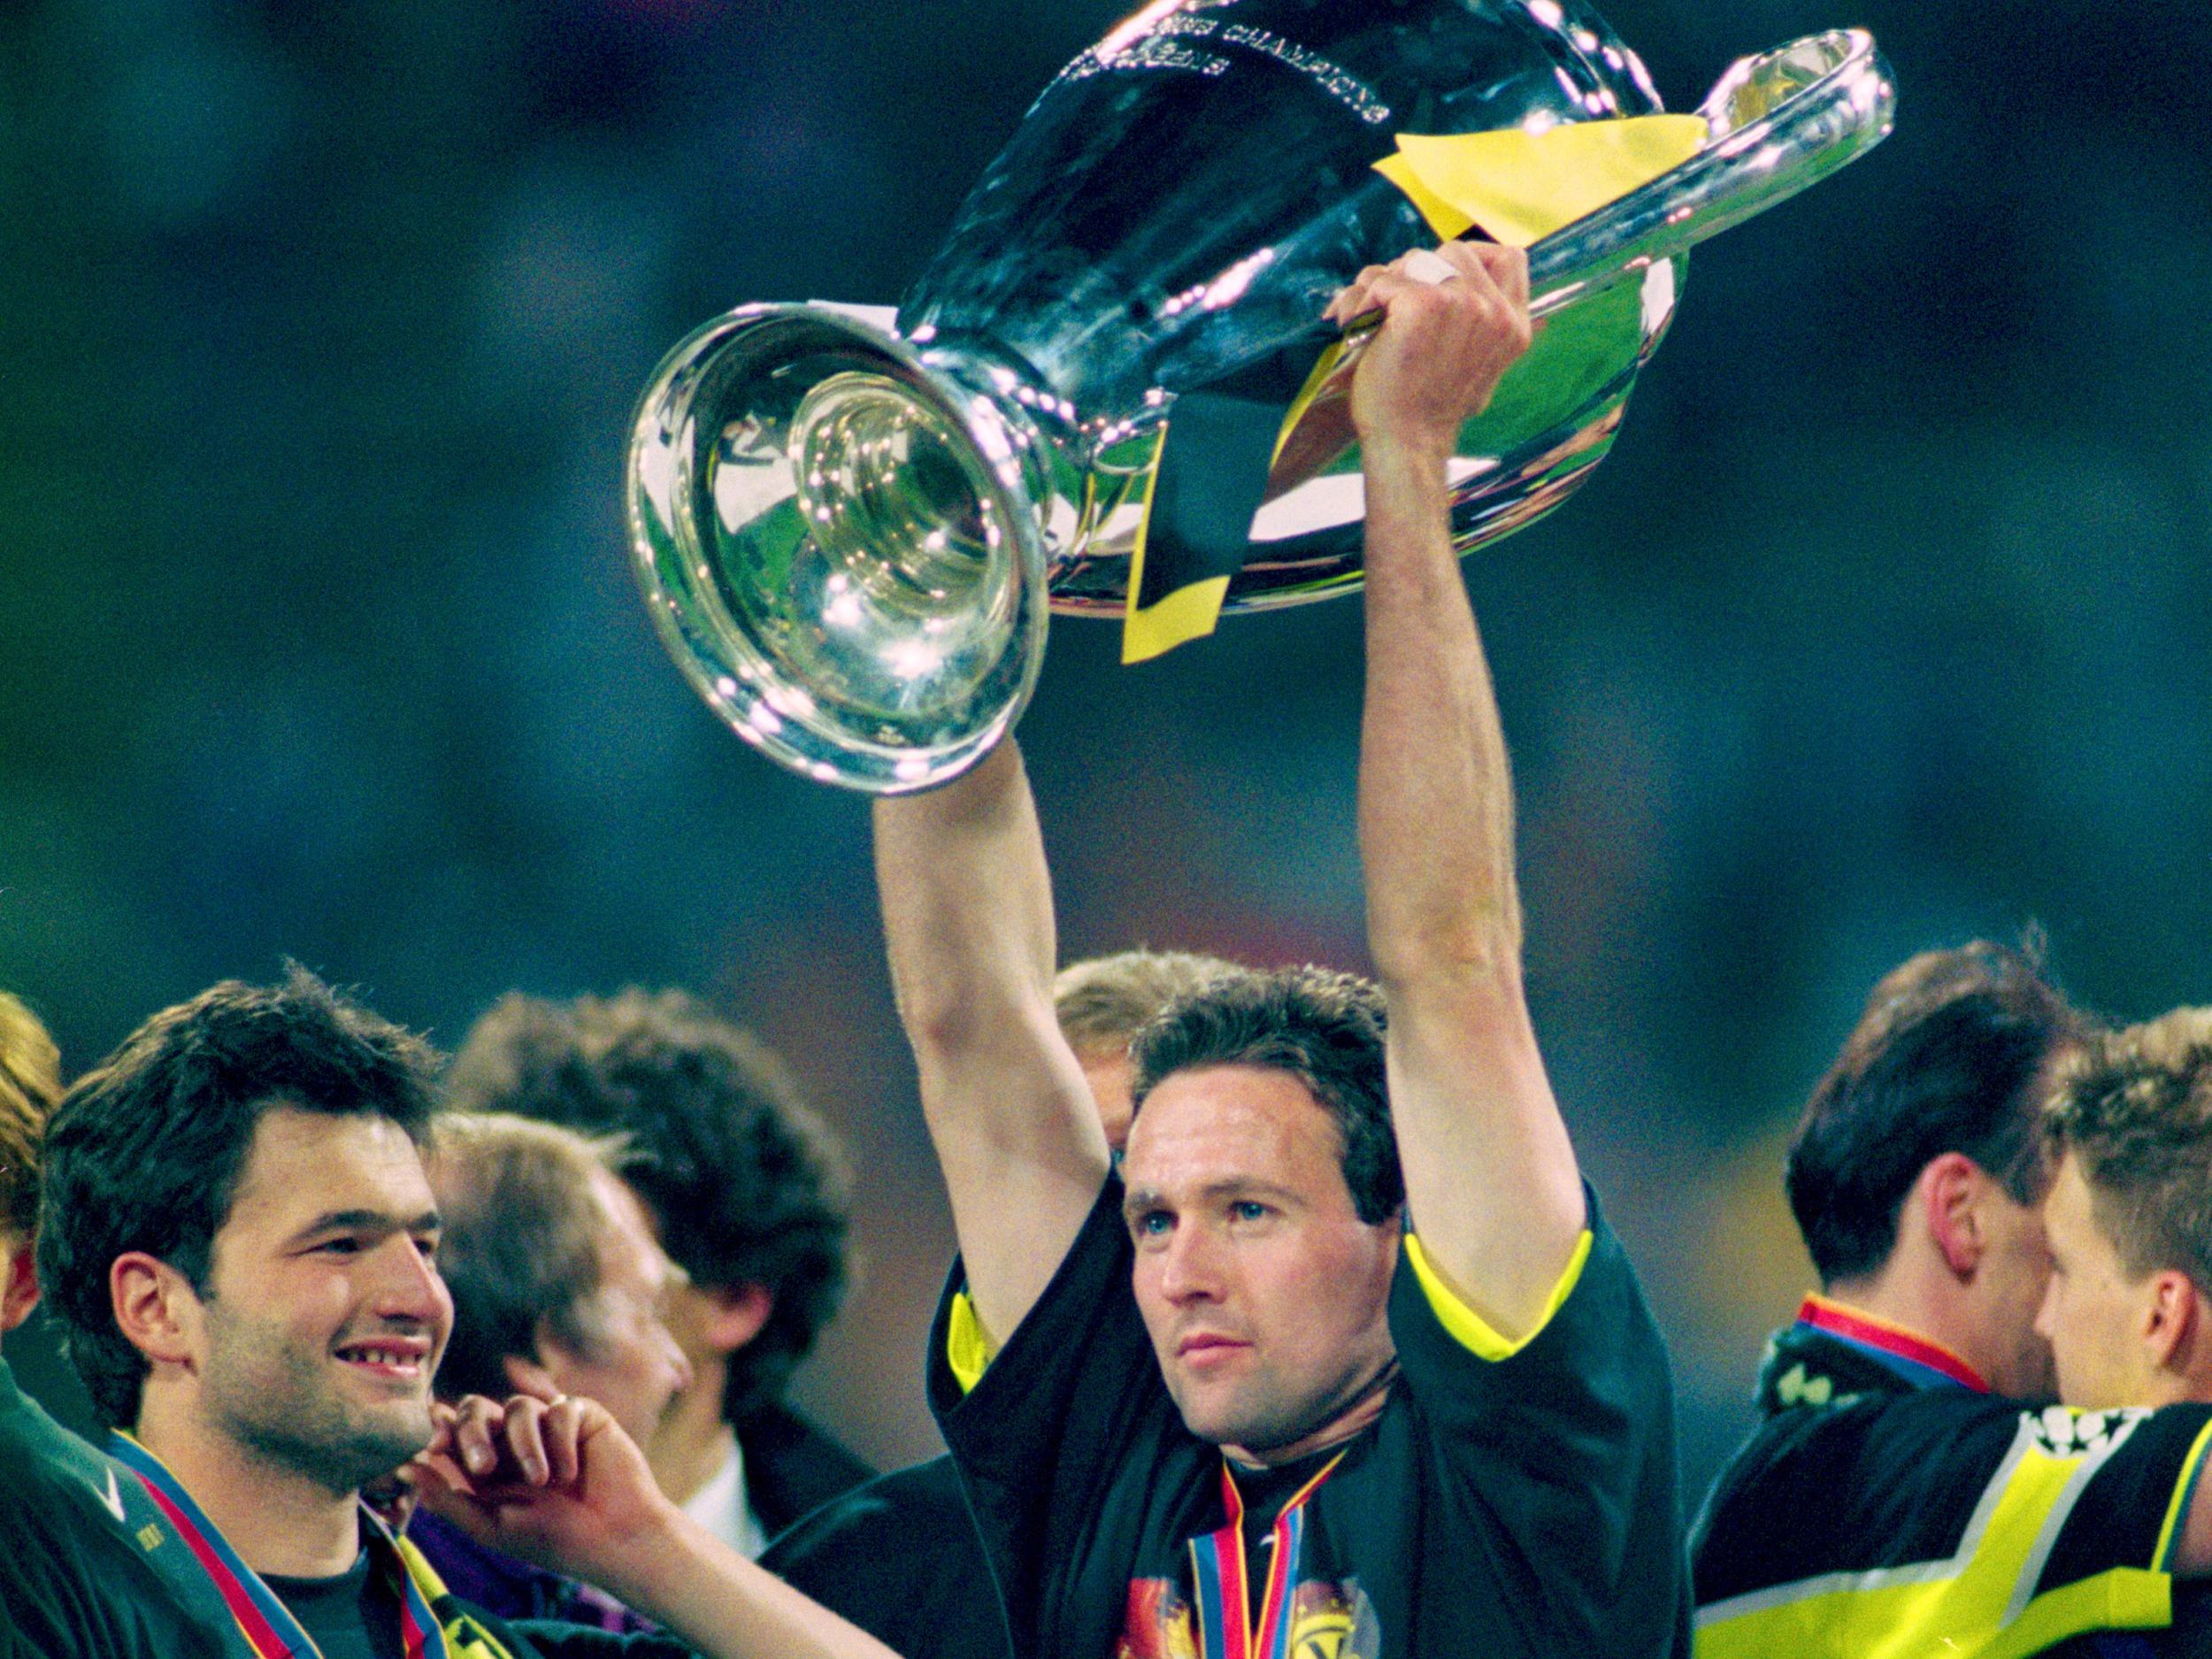 Paul Lambert made 64 appearance for Borussia Dortmund during a two-year stay